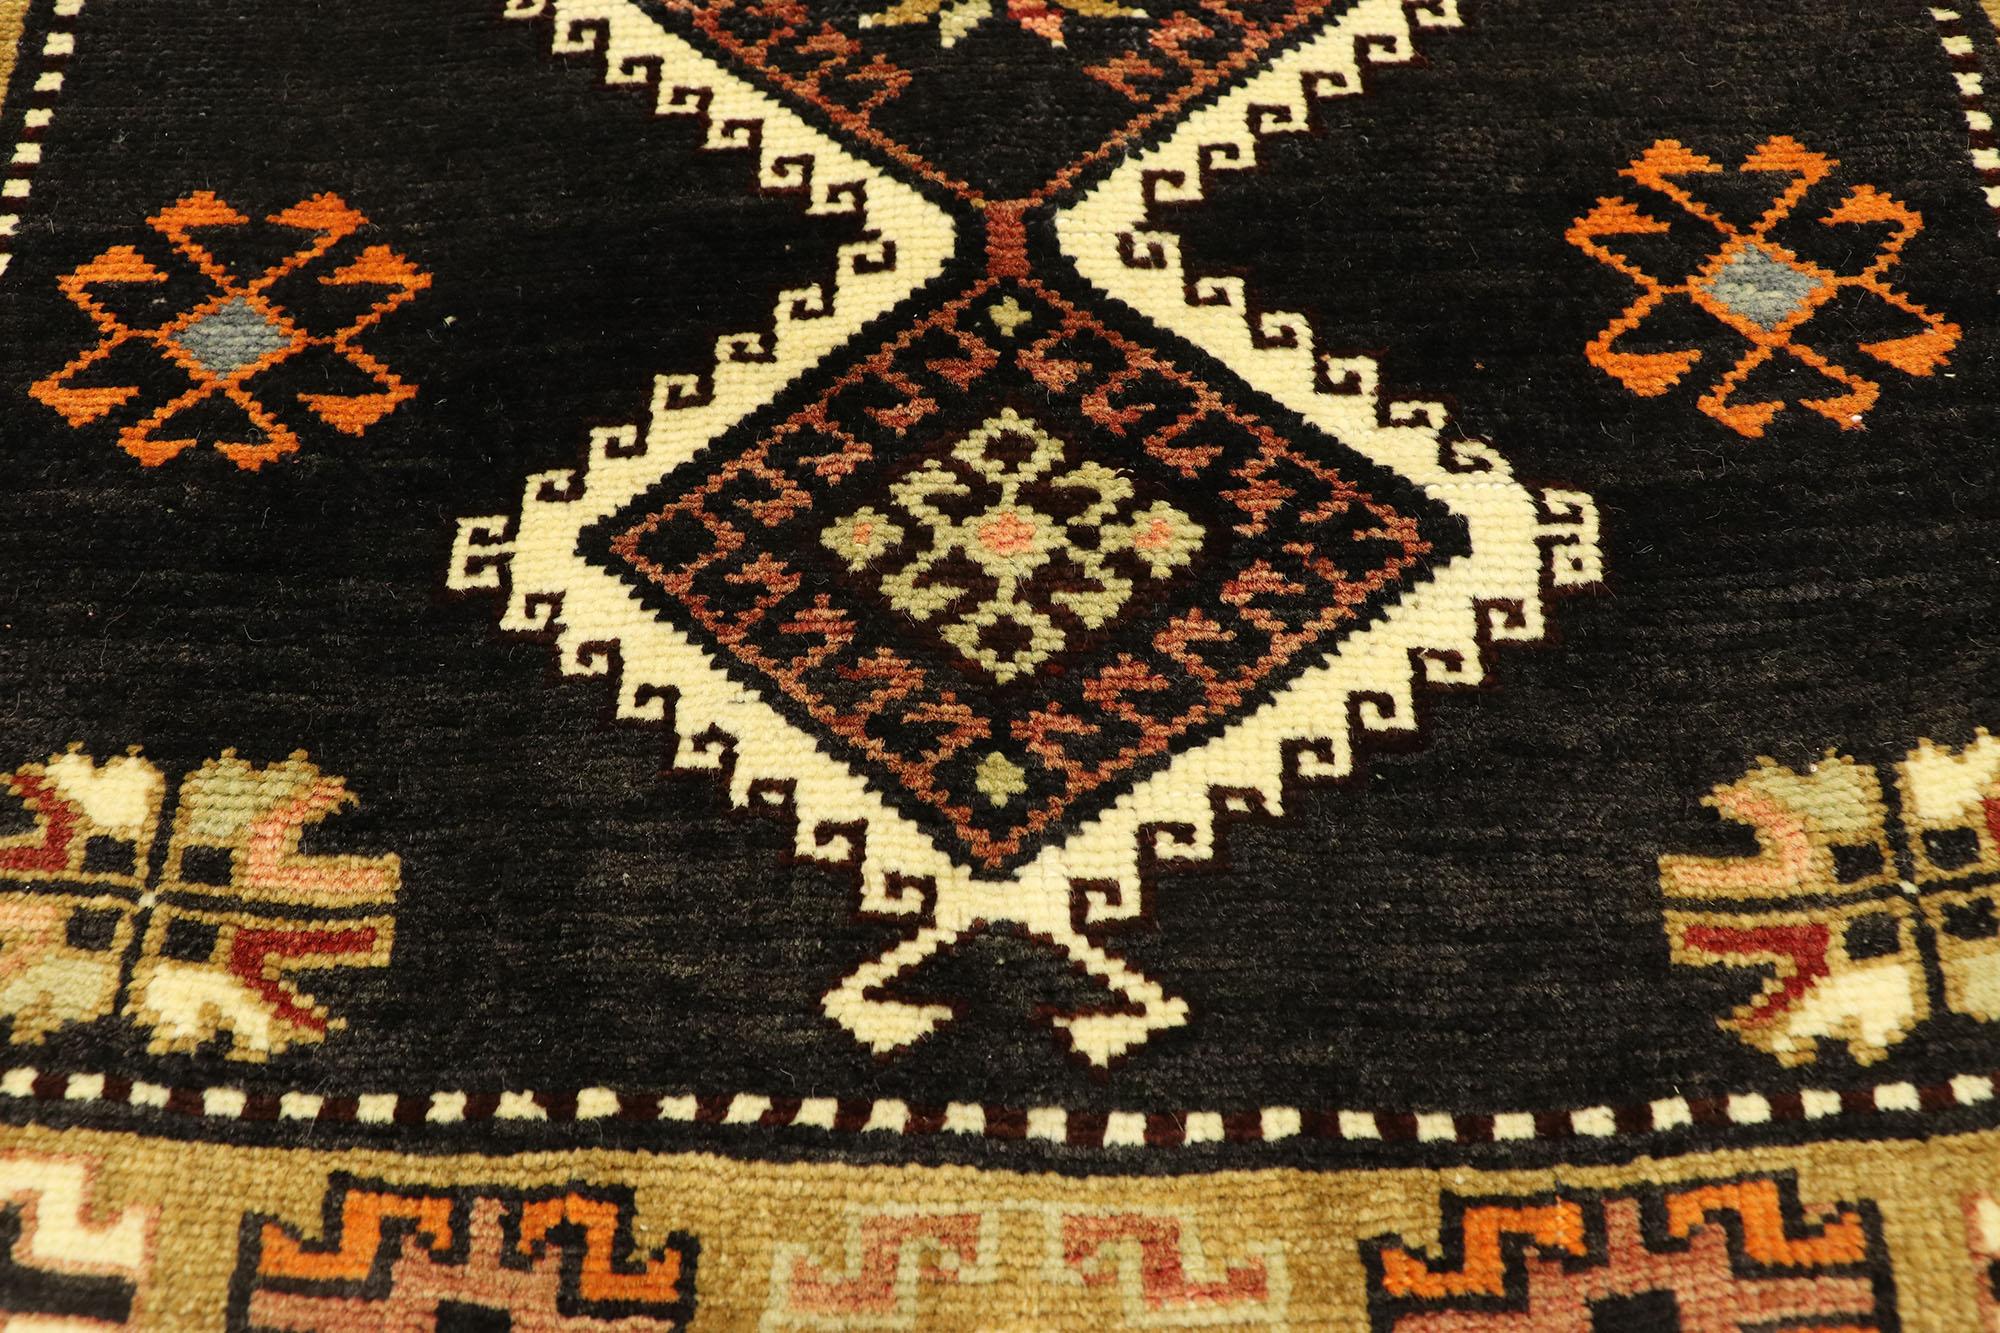 Vintage Turkish Oushak Runner with Mid-Century Modern Style For Sale 1